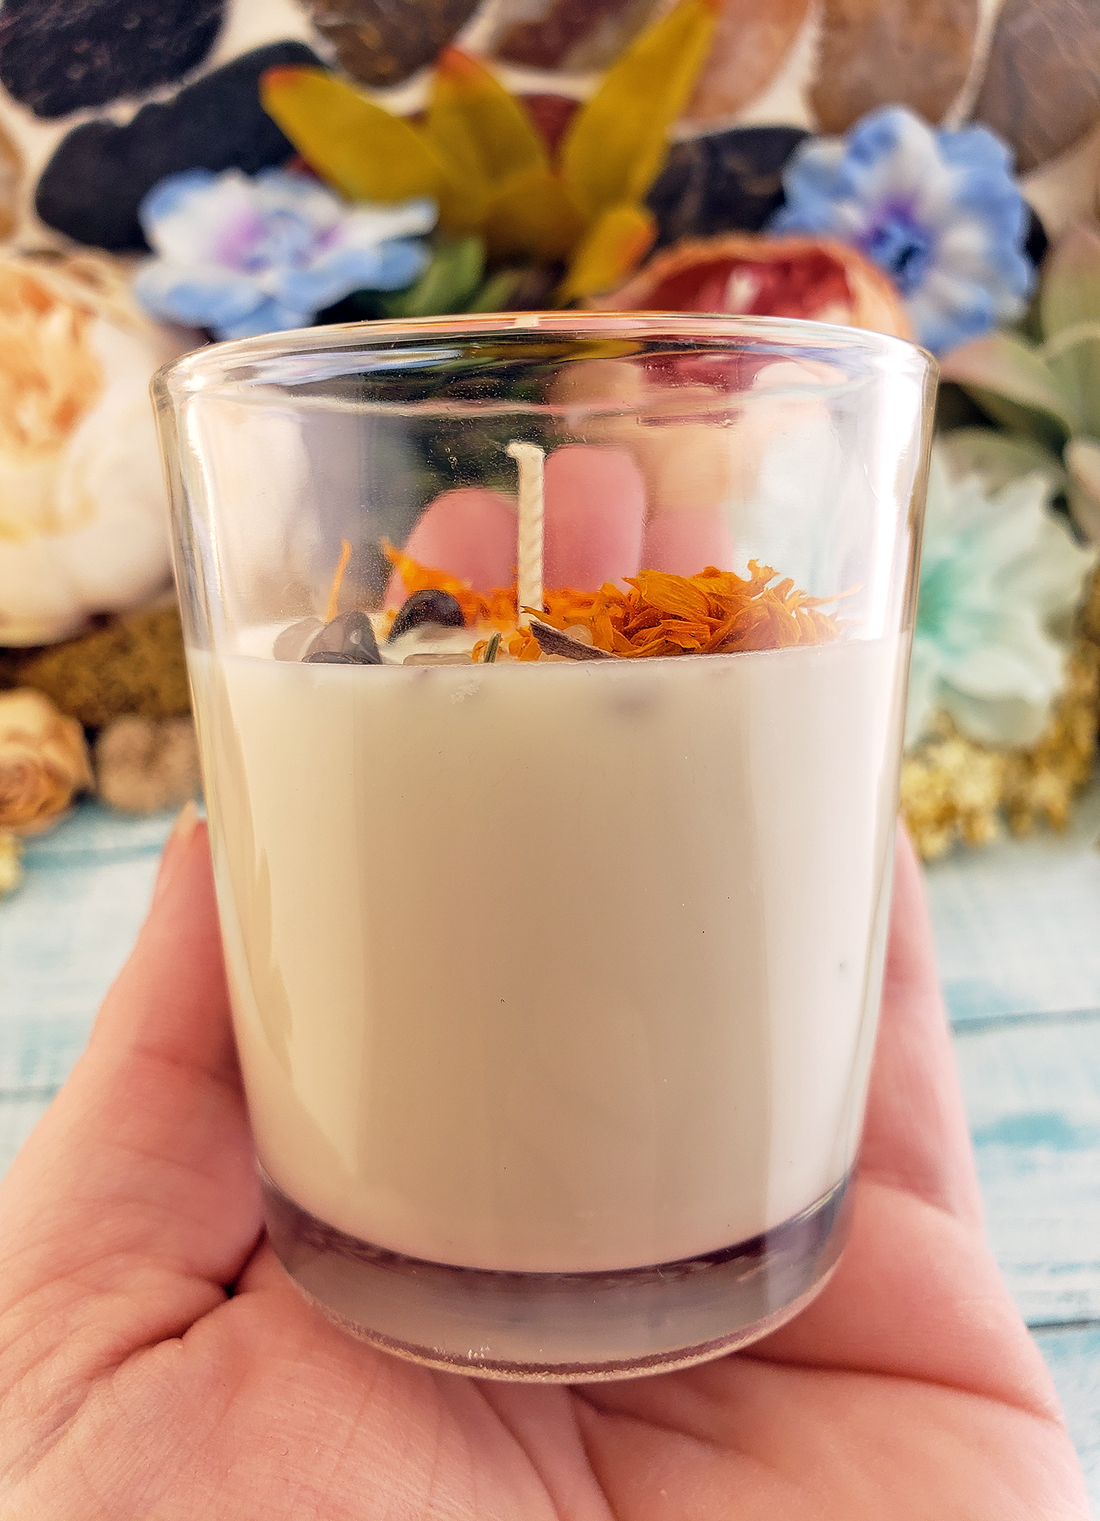 Coconut Soy Wax Handmade Scented Votive Candle & Gem Chips - Strength - Scented with Essential Oils - Decorated with Dried Herbs